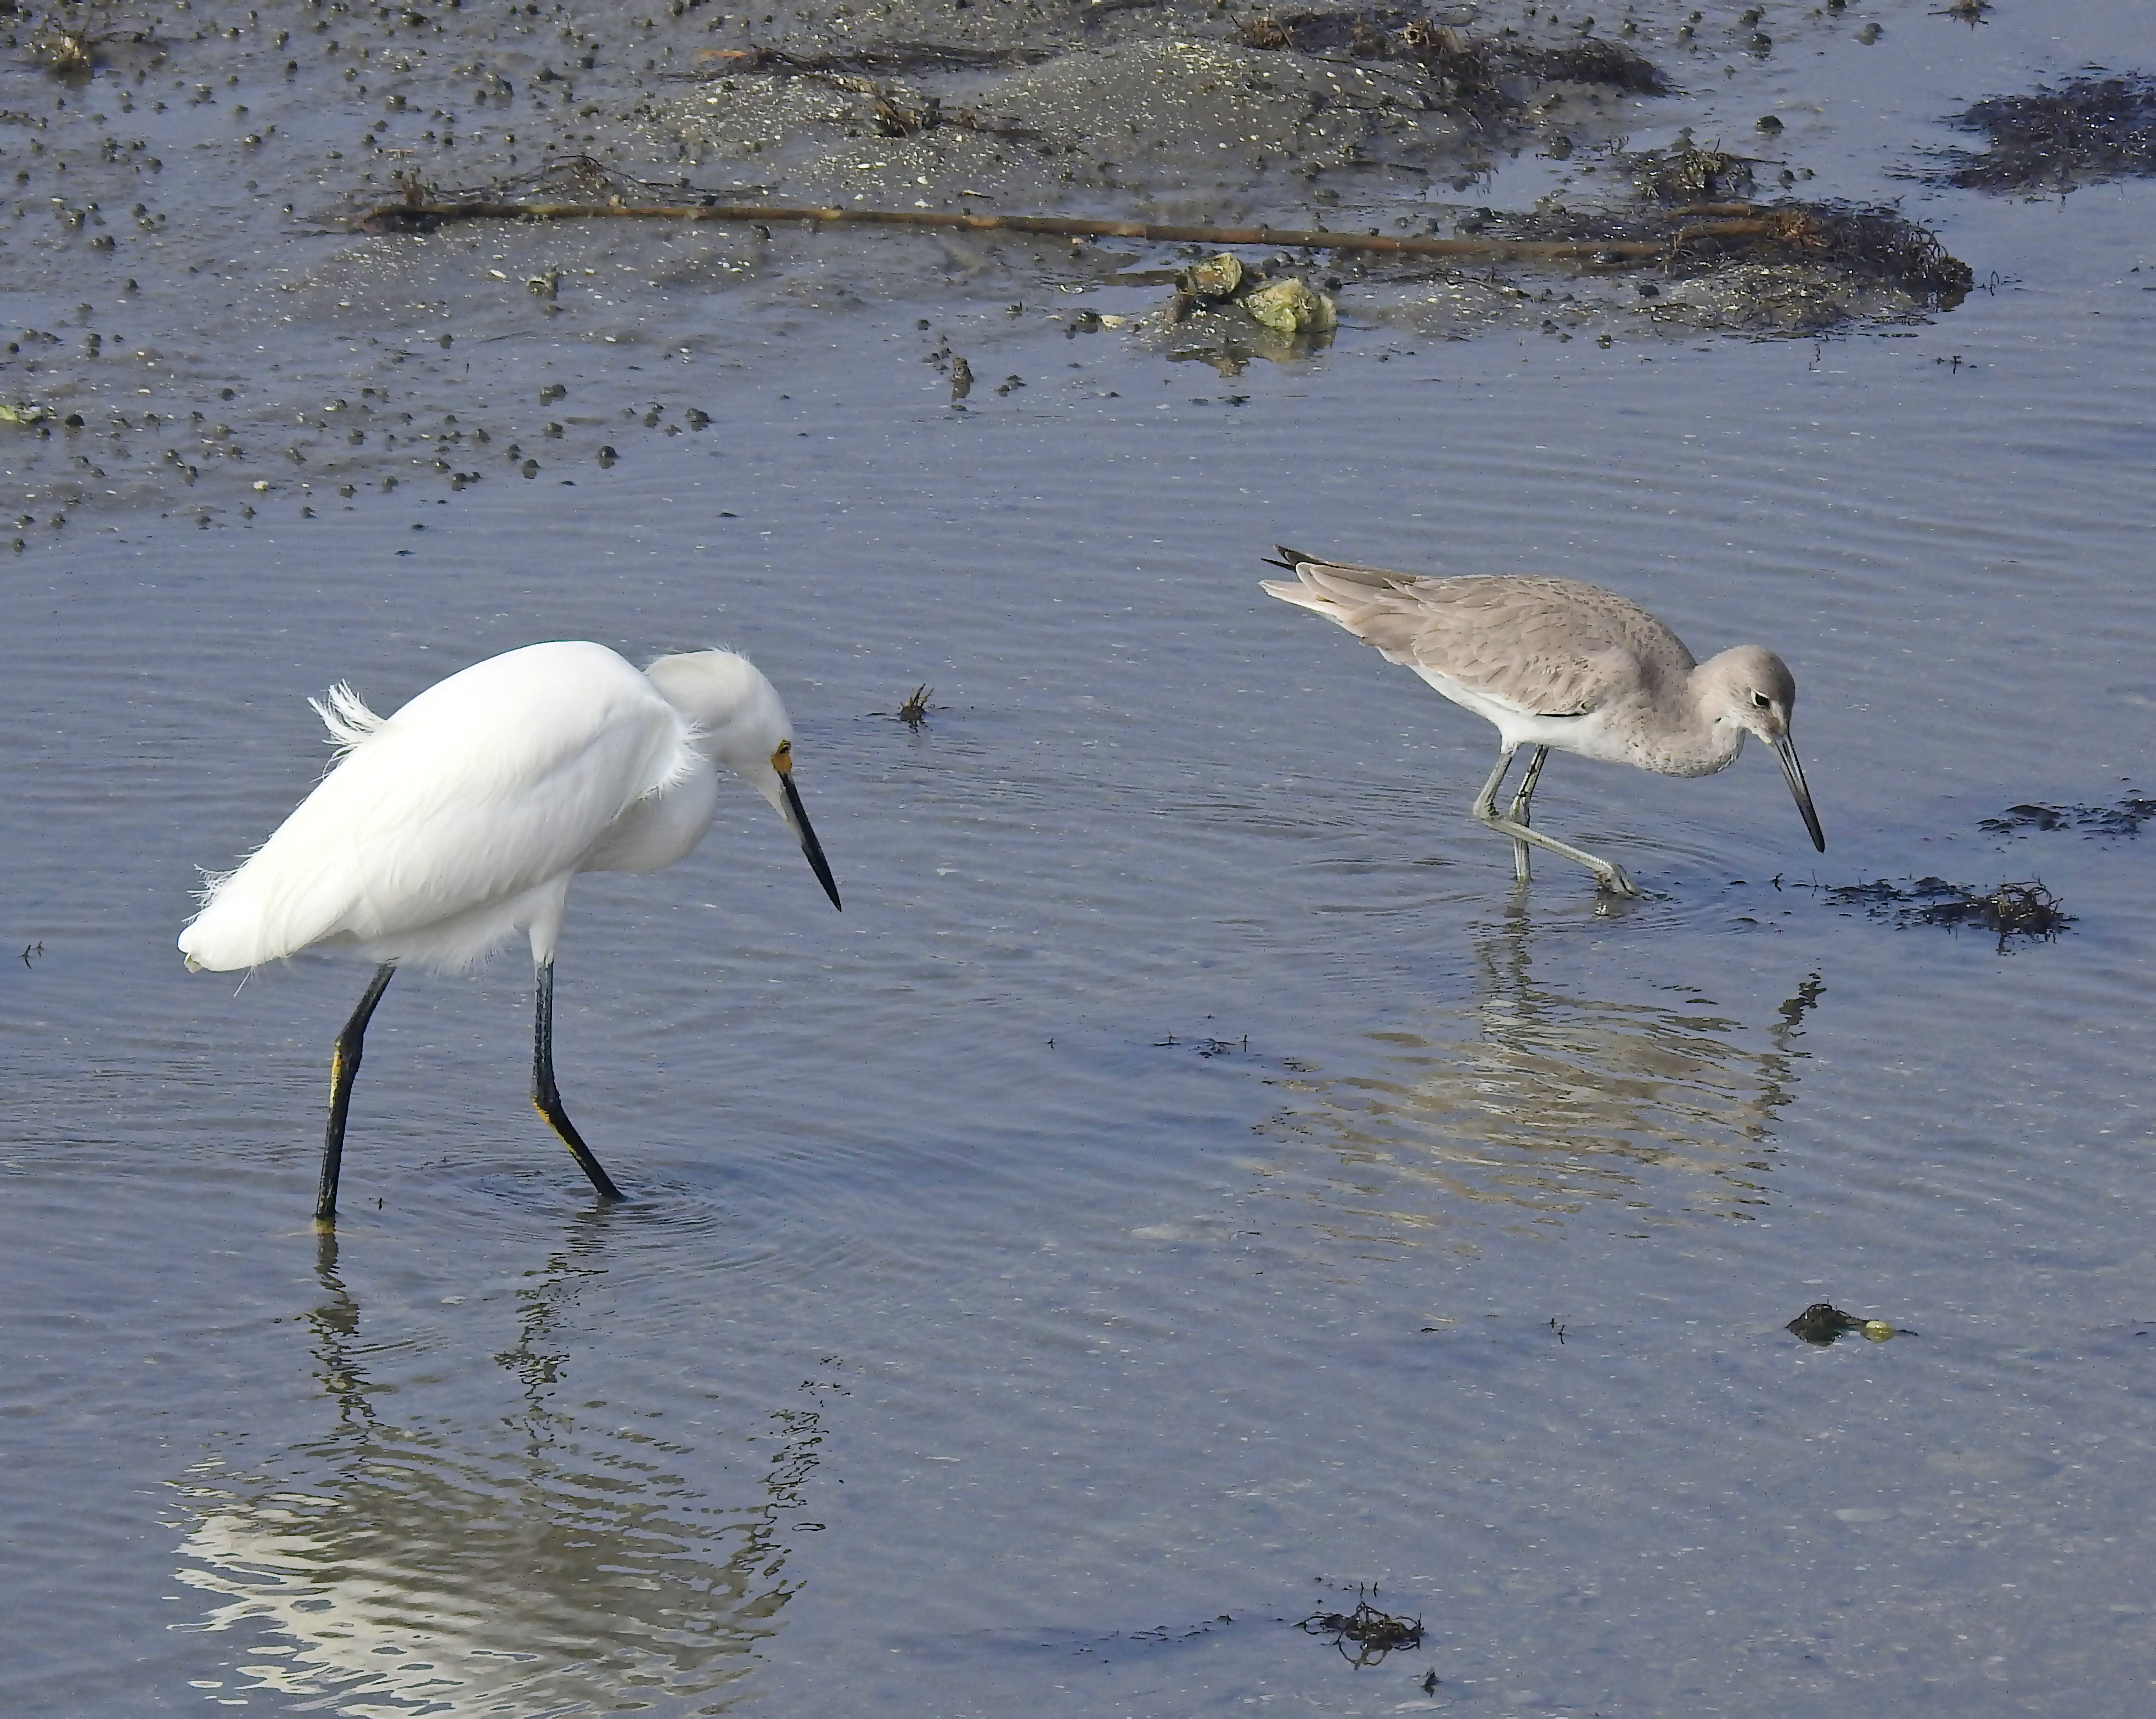 From left to right the Snowy Egret and a Willet in winter plumage.